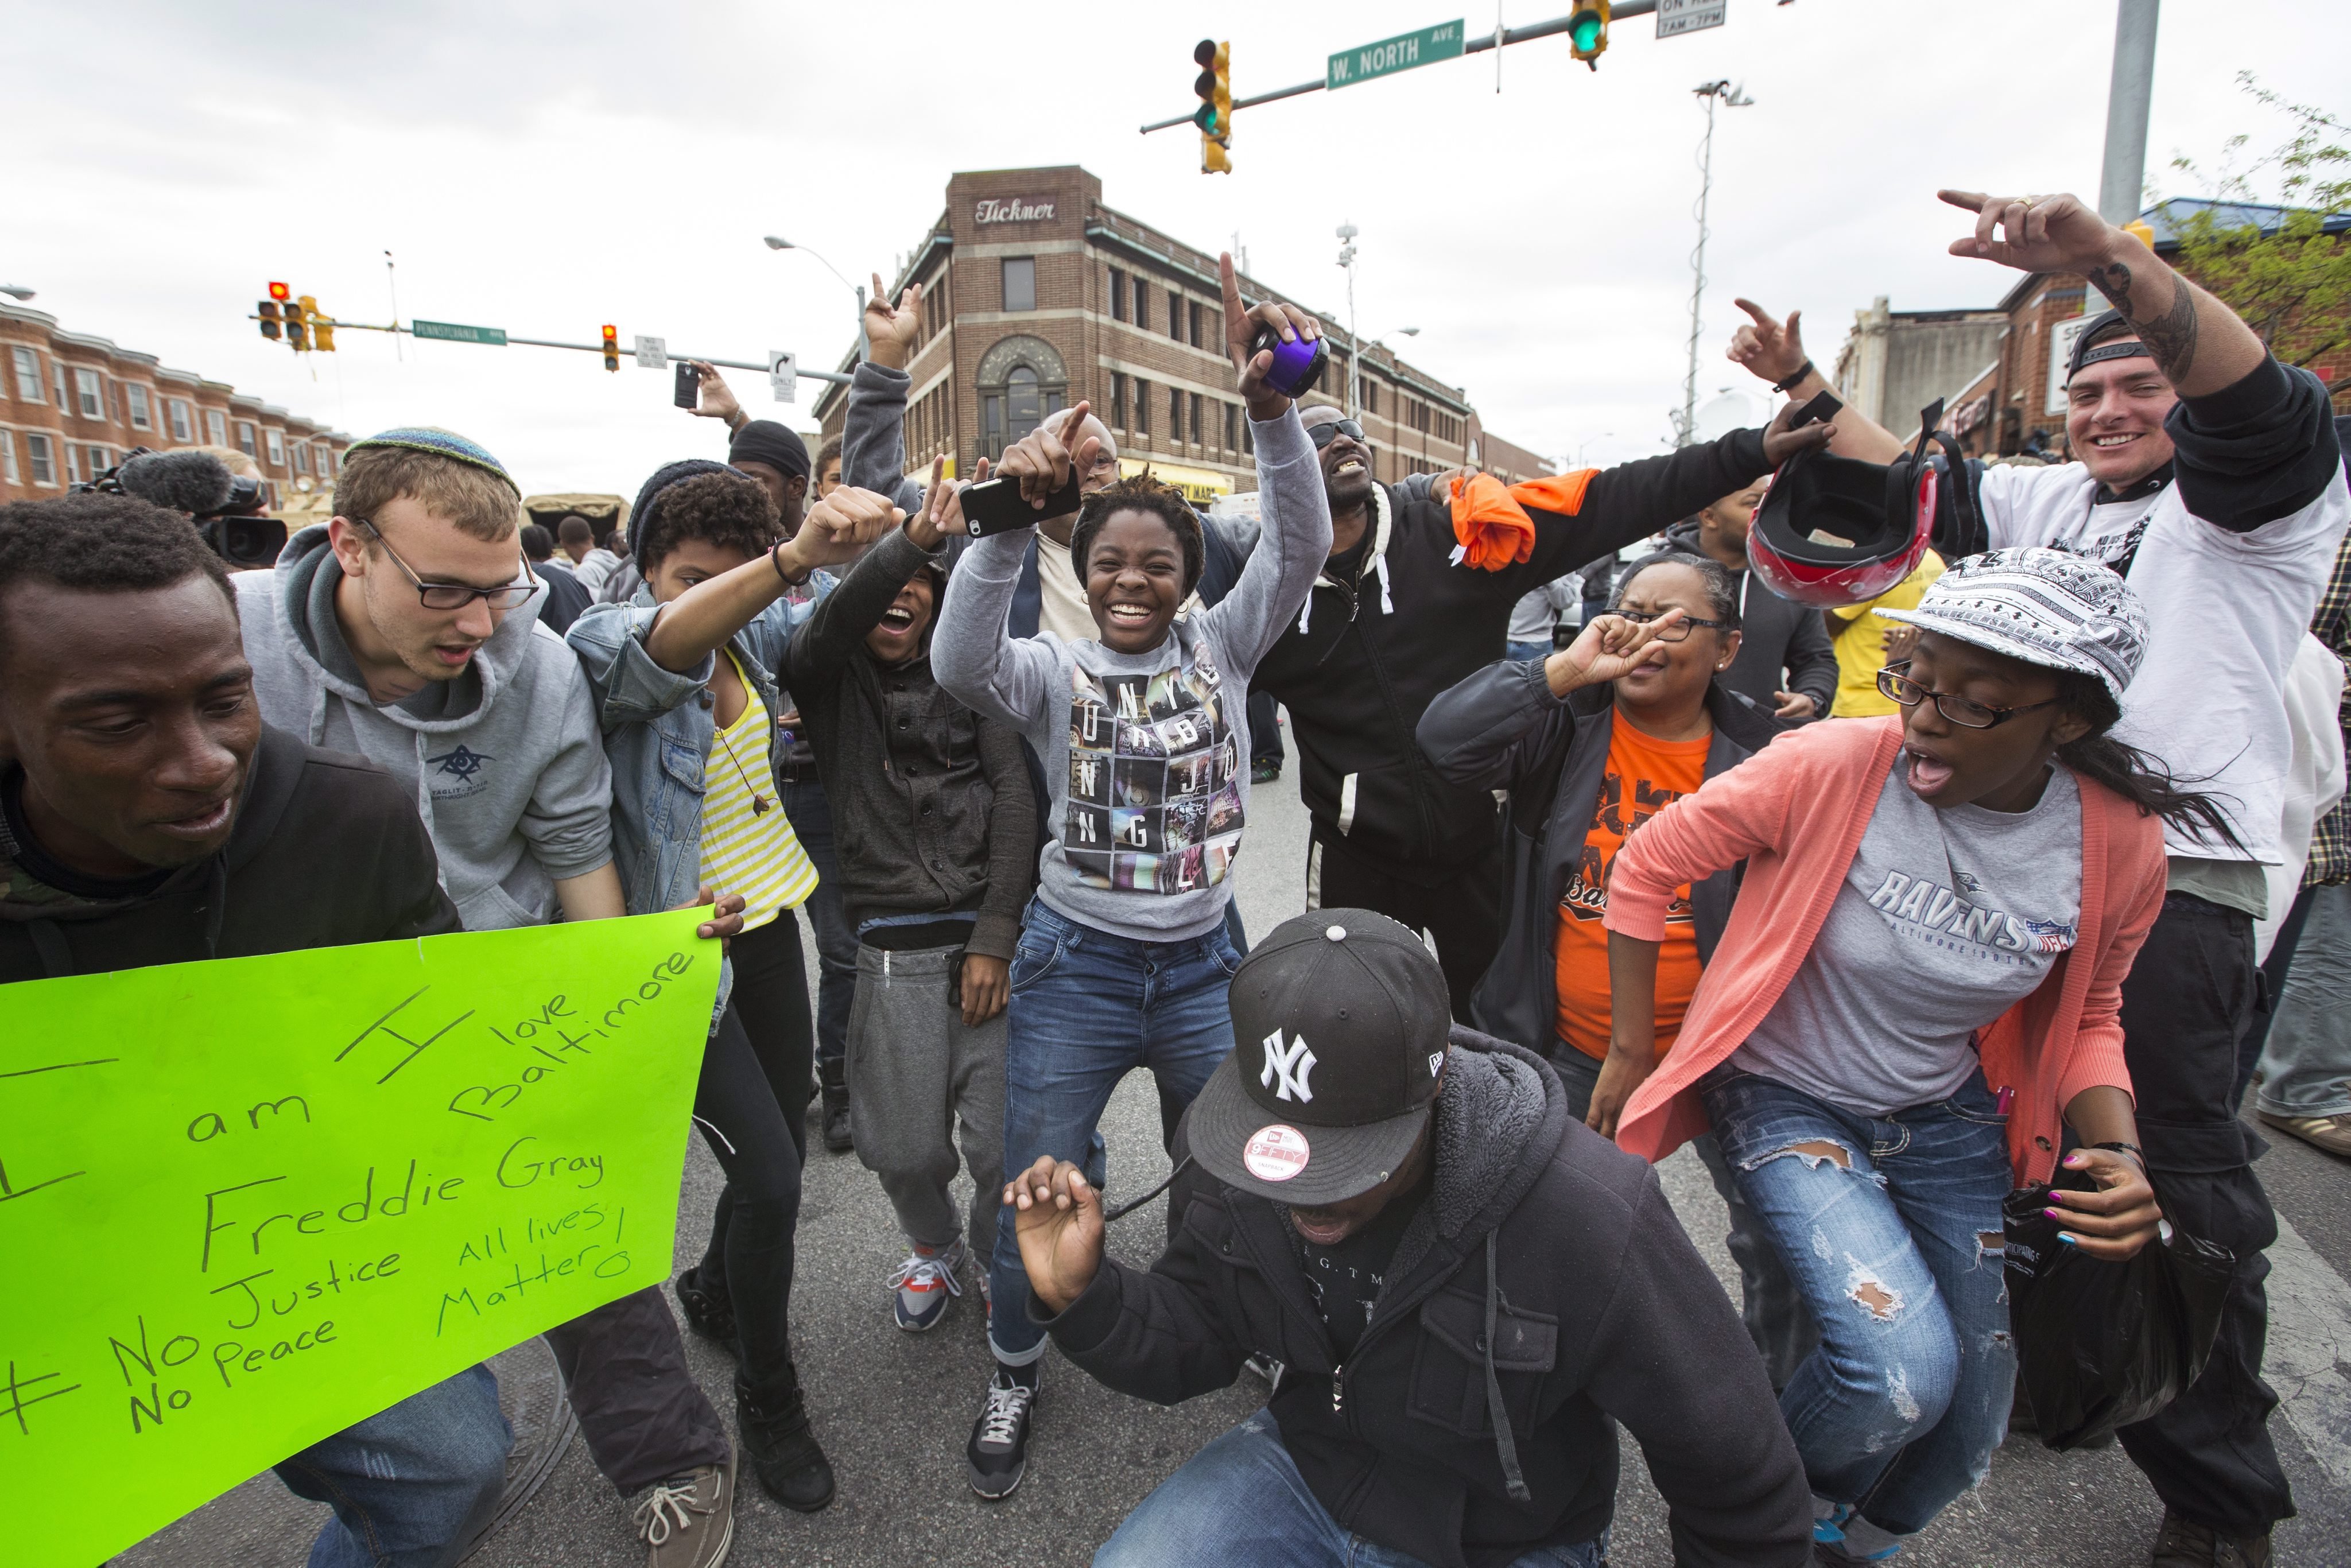 People celebrate in the streets of the Sandtown neighborhood in Baltimore after State Attorney Marilyn Mosby announced that six police officers are being charged in the death of Freddie Gray, in Baltimore on May 1, 2015. (Jim Lo Scalzo—EPA)